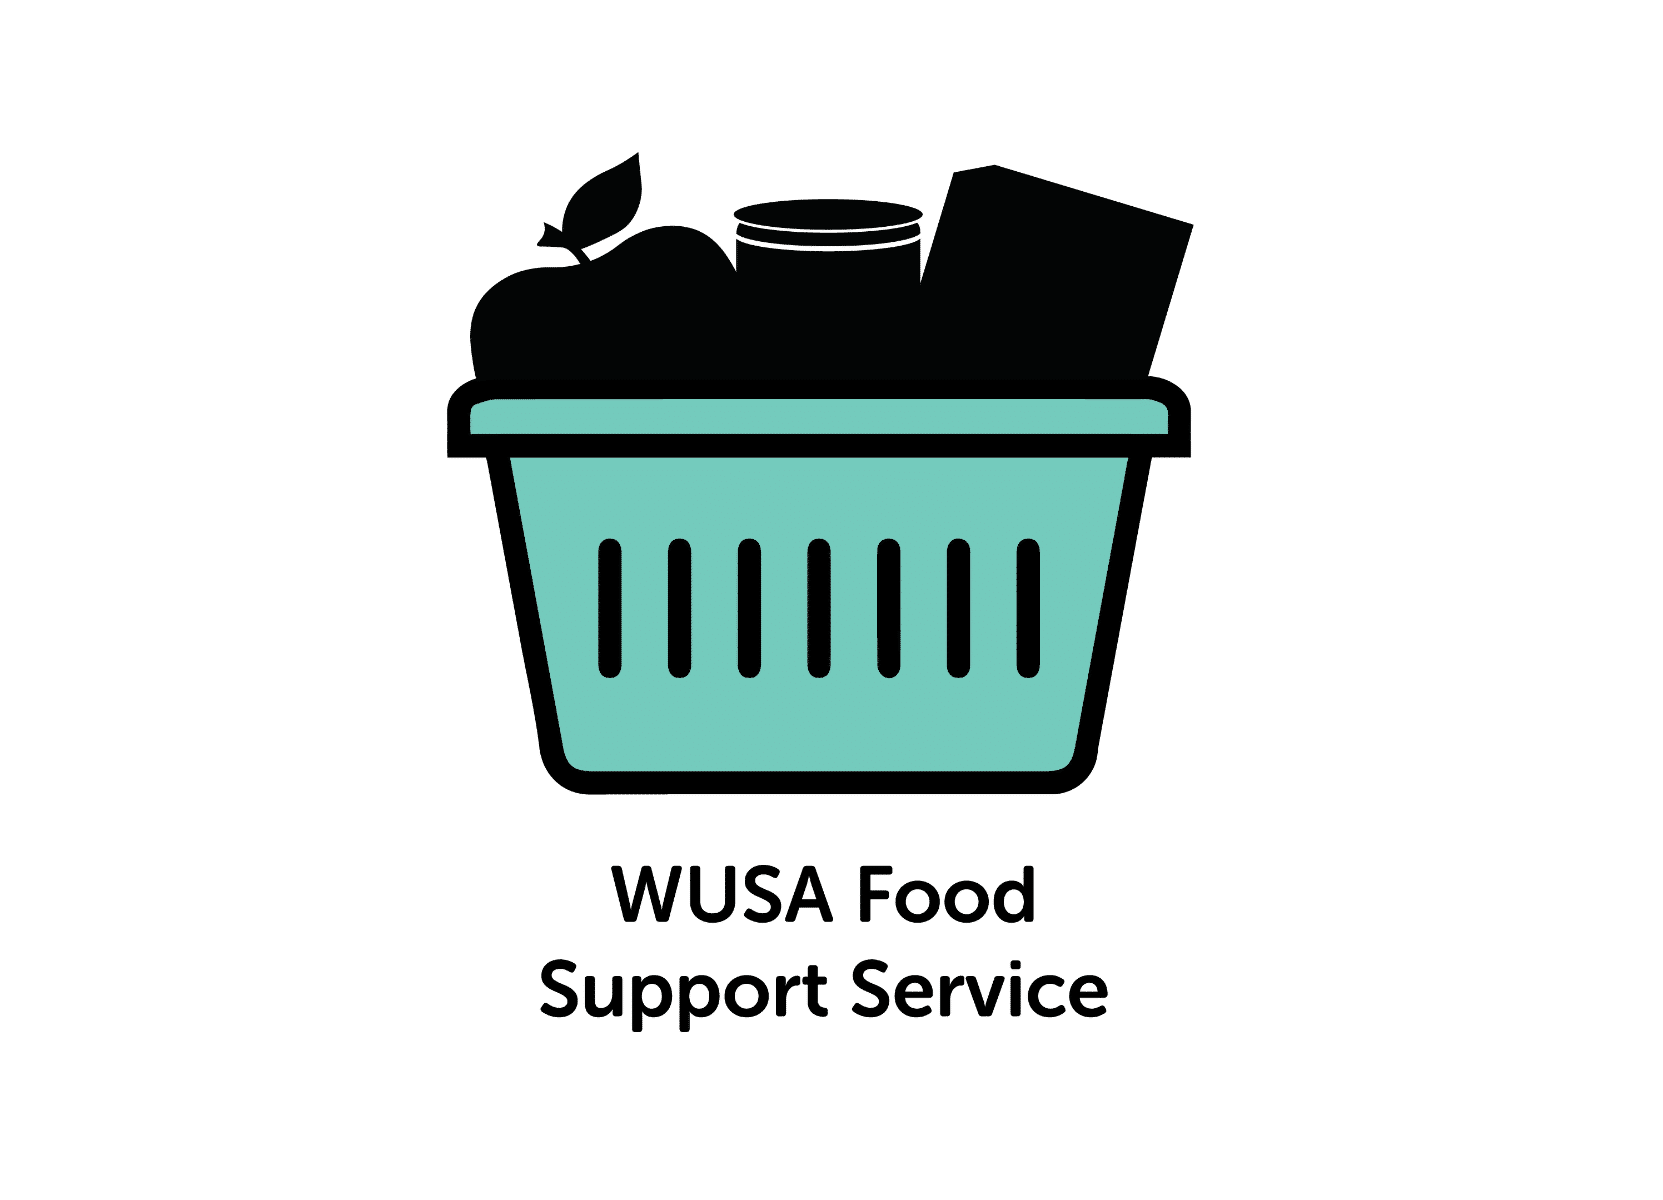 Food Support Logo